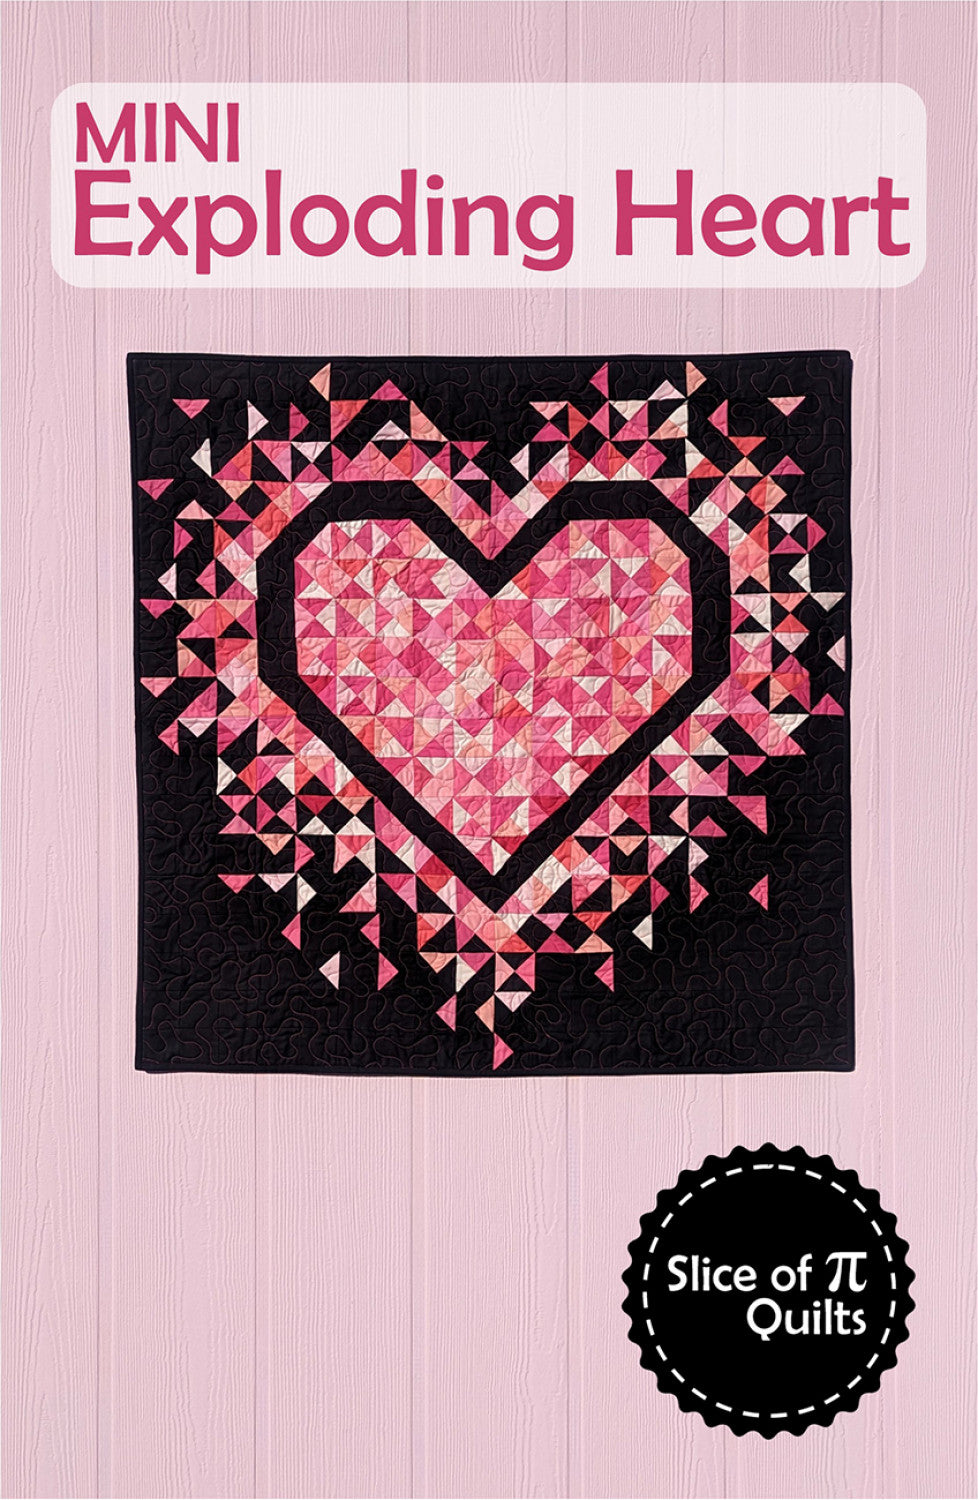 Mini Exploding Heart by Slice of Pi Quilts